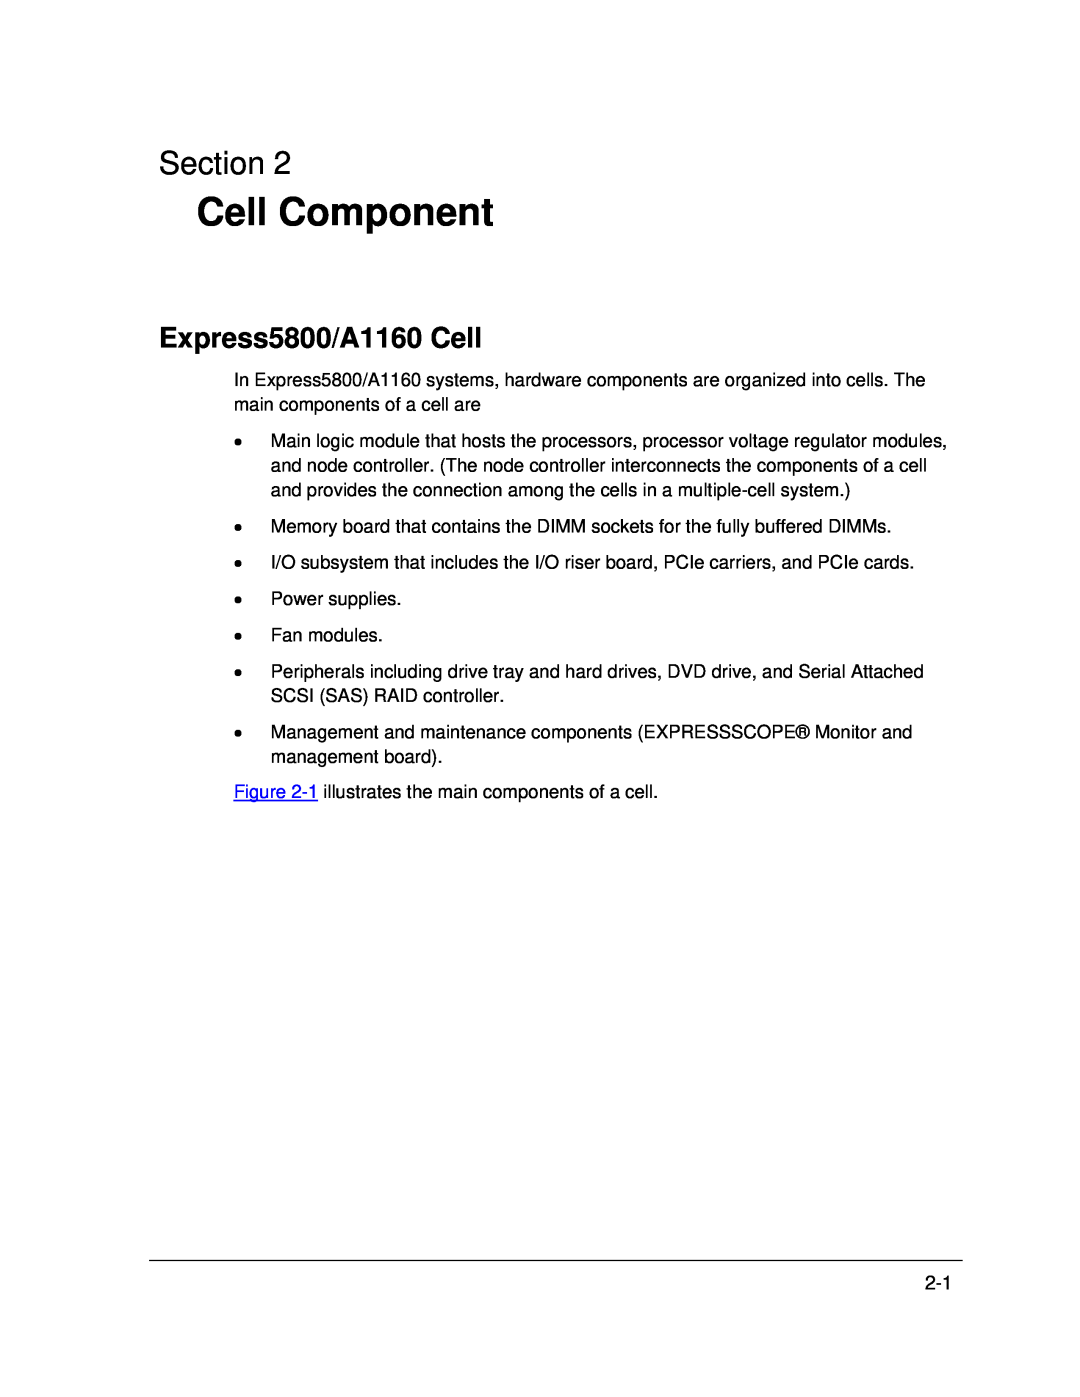 NEC manual Cell Component, Express5800/A1160 Cell, Section 